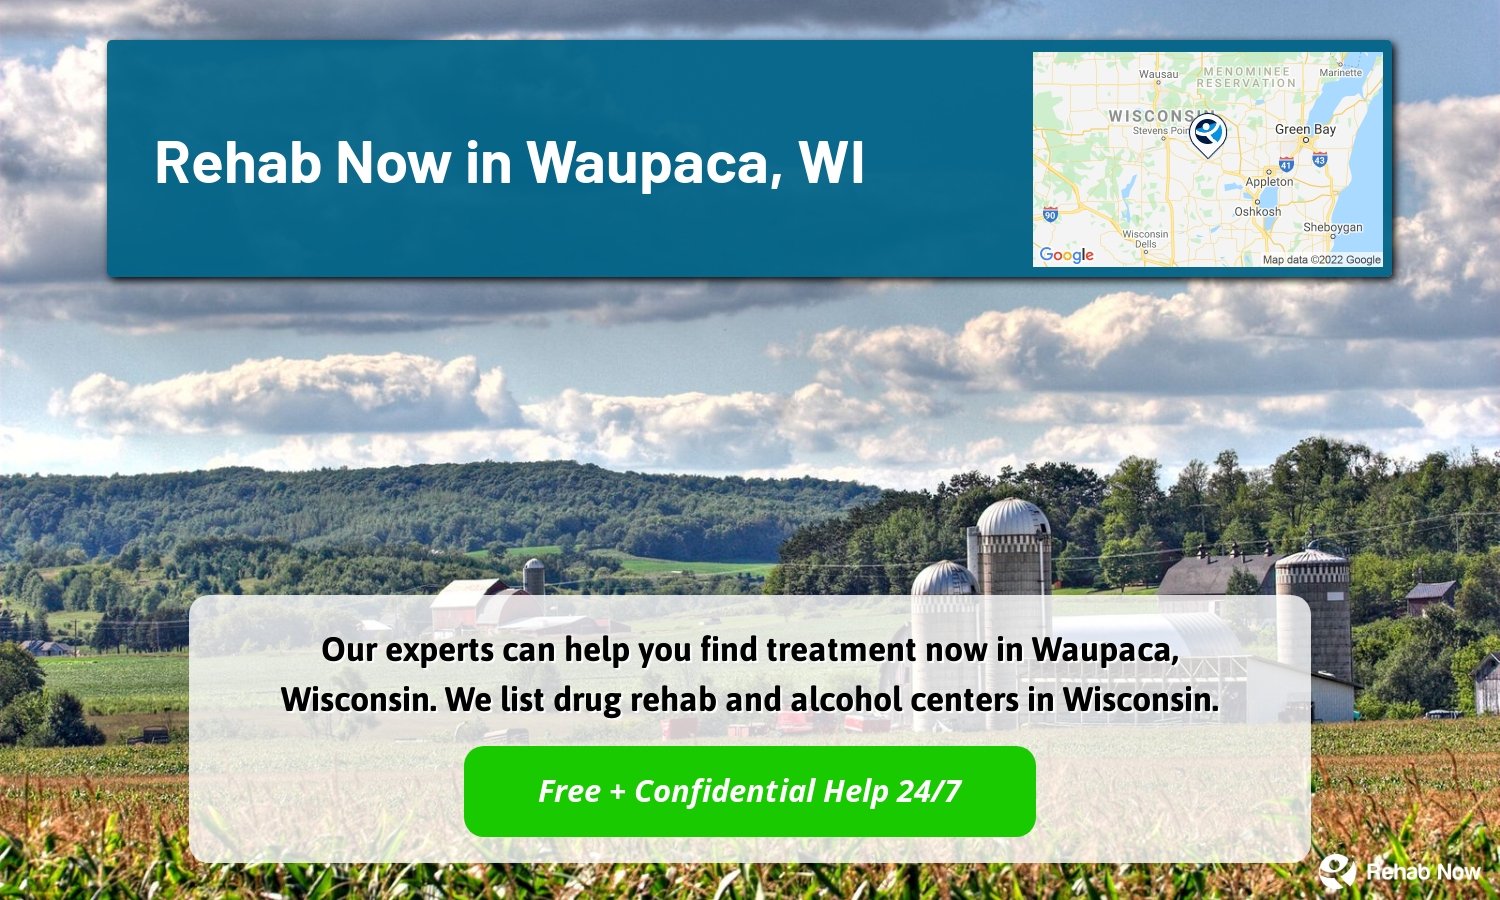 Our experts can help you find treatment now in Waupaca, Wisconsin. We list drug rehab and alcohol centers in Wisconsin.